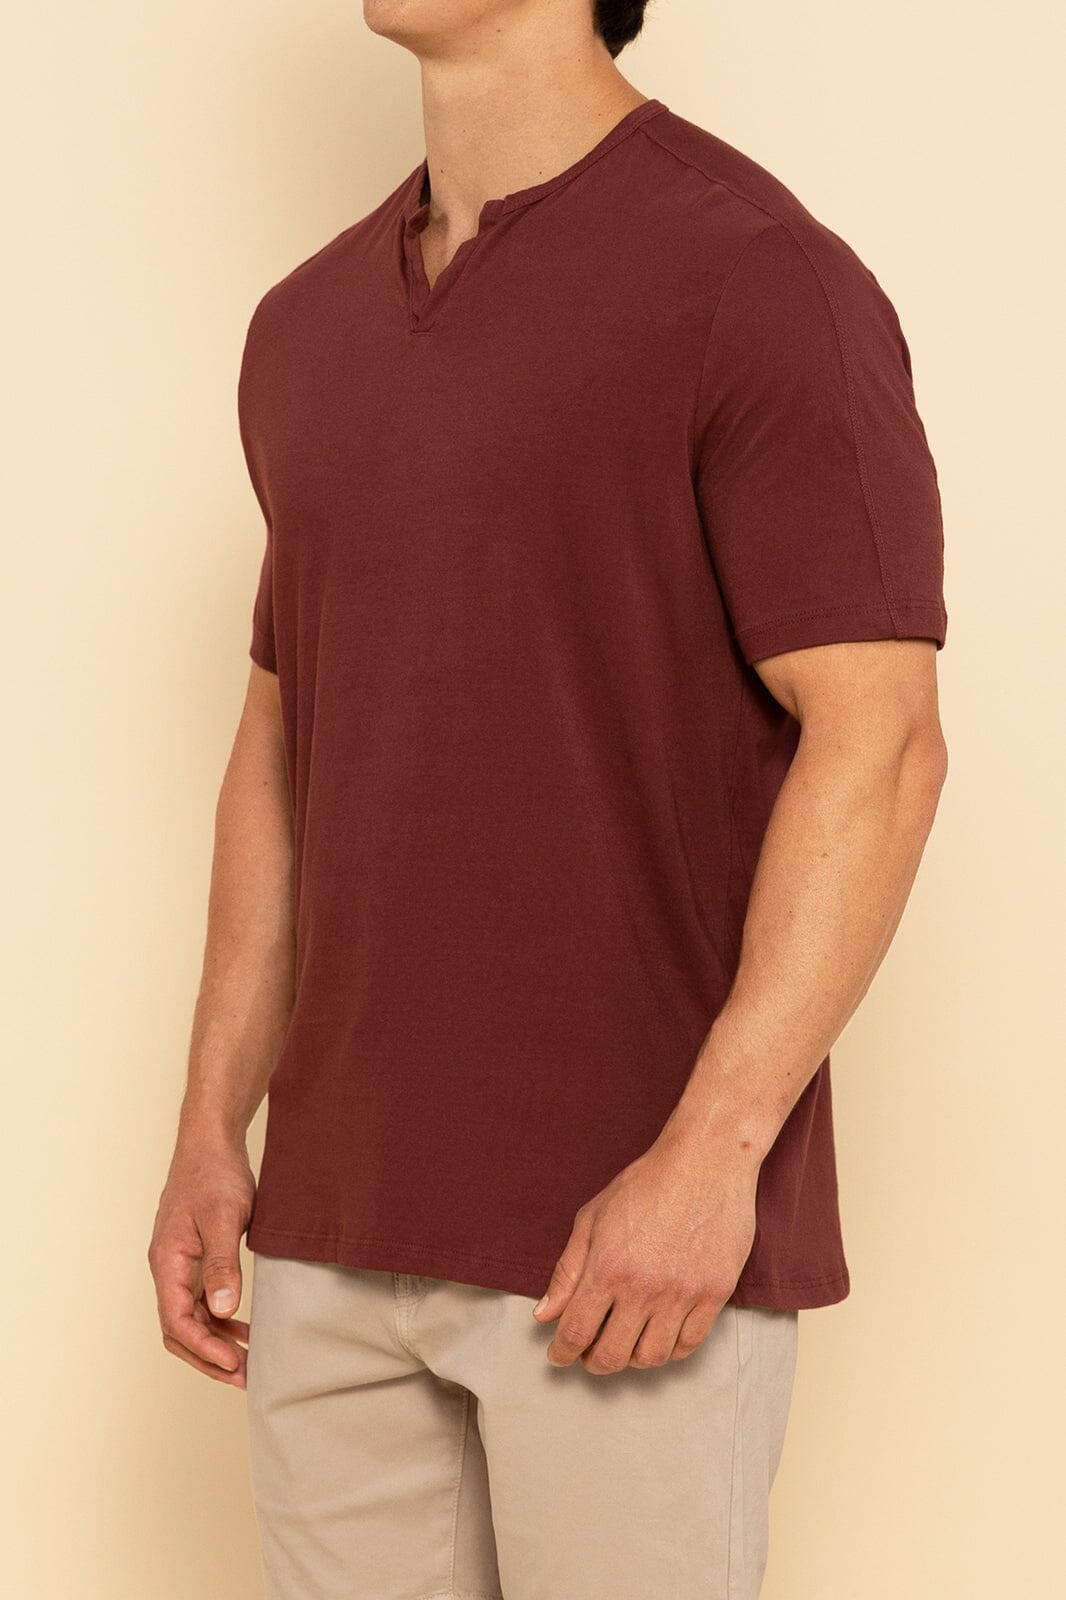 Maroon Notch Neck Tee For Men - Front Side Angle